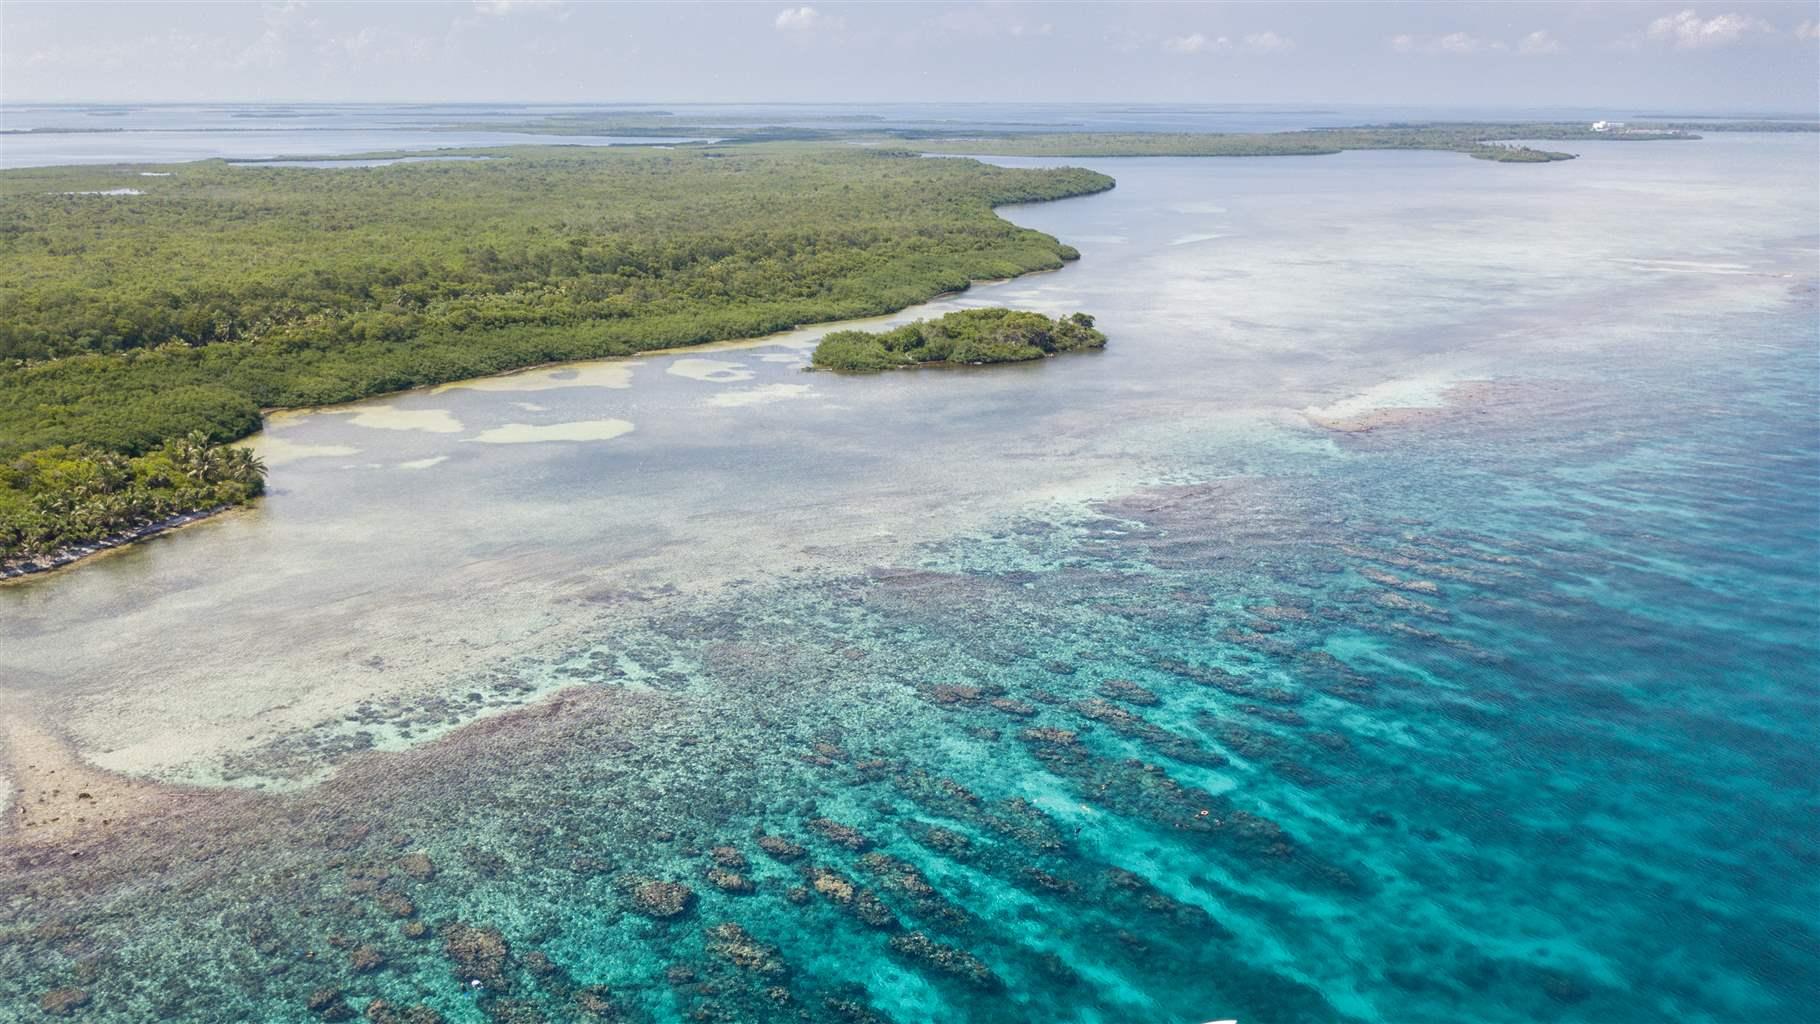 Coral reefs, mangroves, and seagrass beds like those found along Turneffe Atoll in Belize